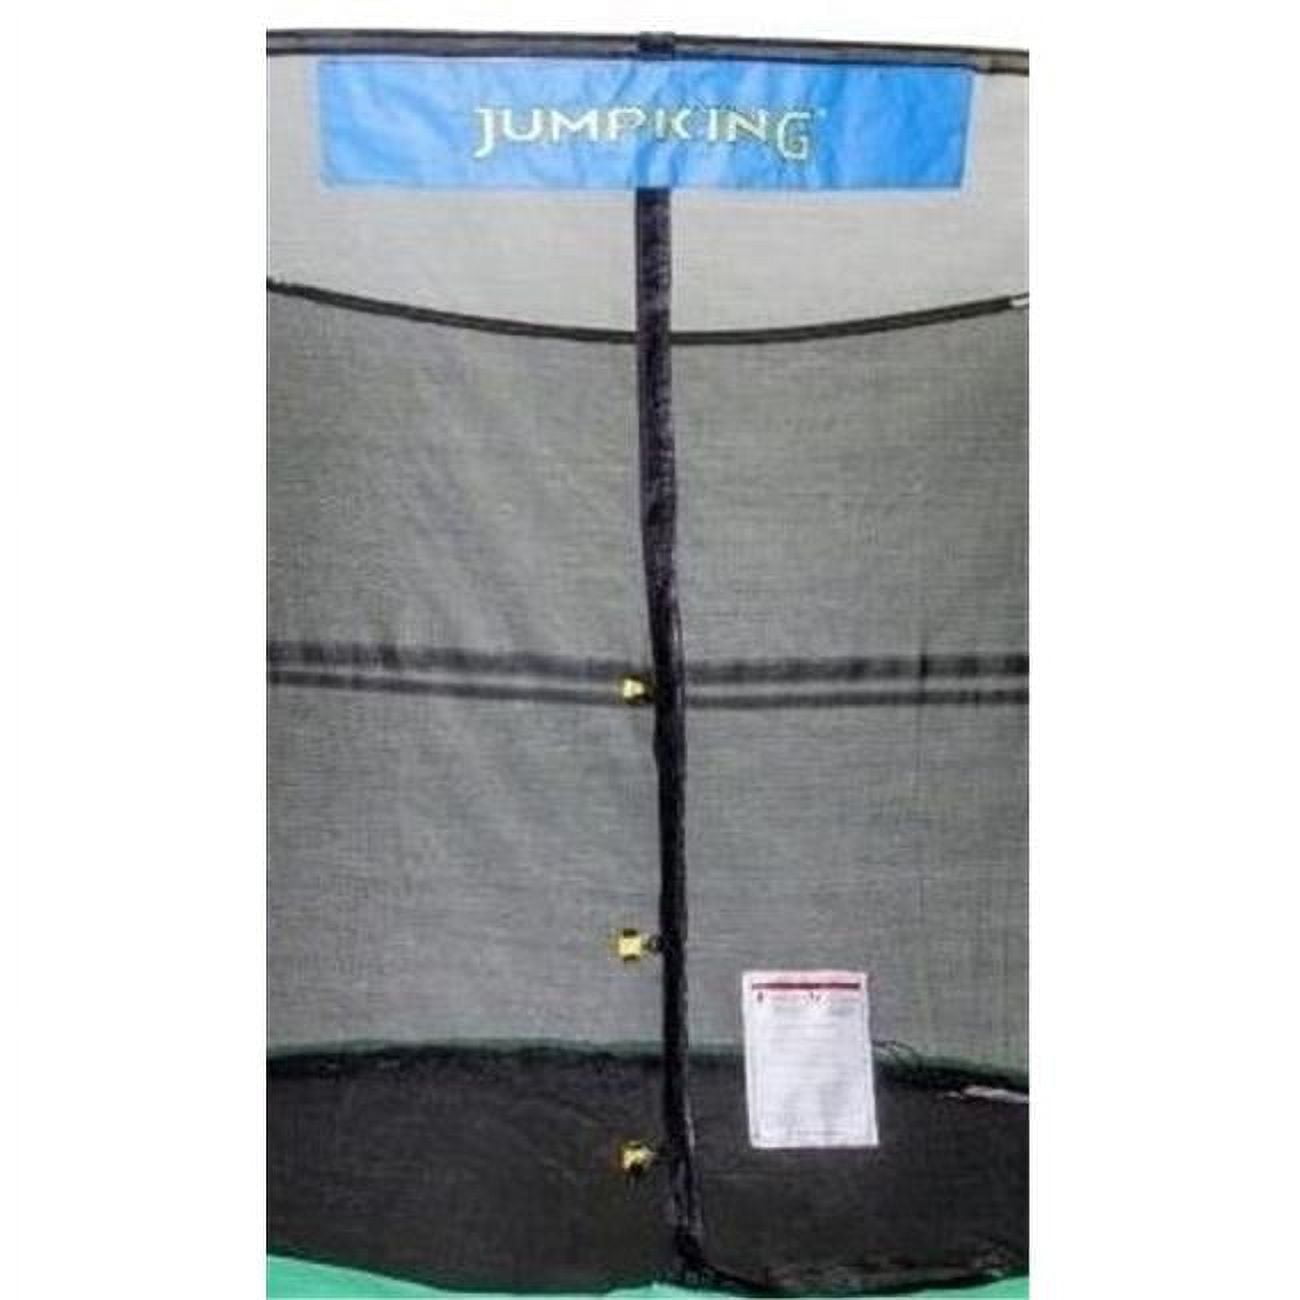 Picture of Jumpking NET15-SP6-5.5JK 15 ft. Enclosure Netting with 6 Short Poles for 5.5 in. Springs with JK Logo Model